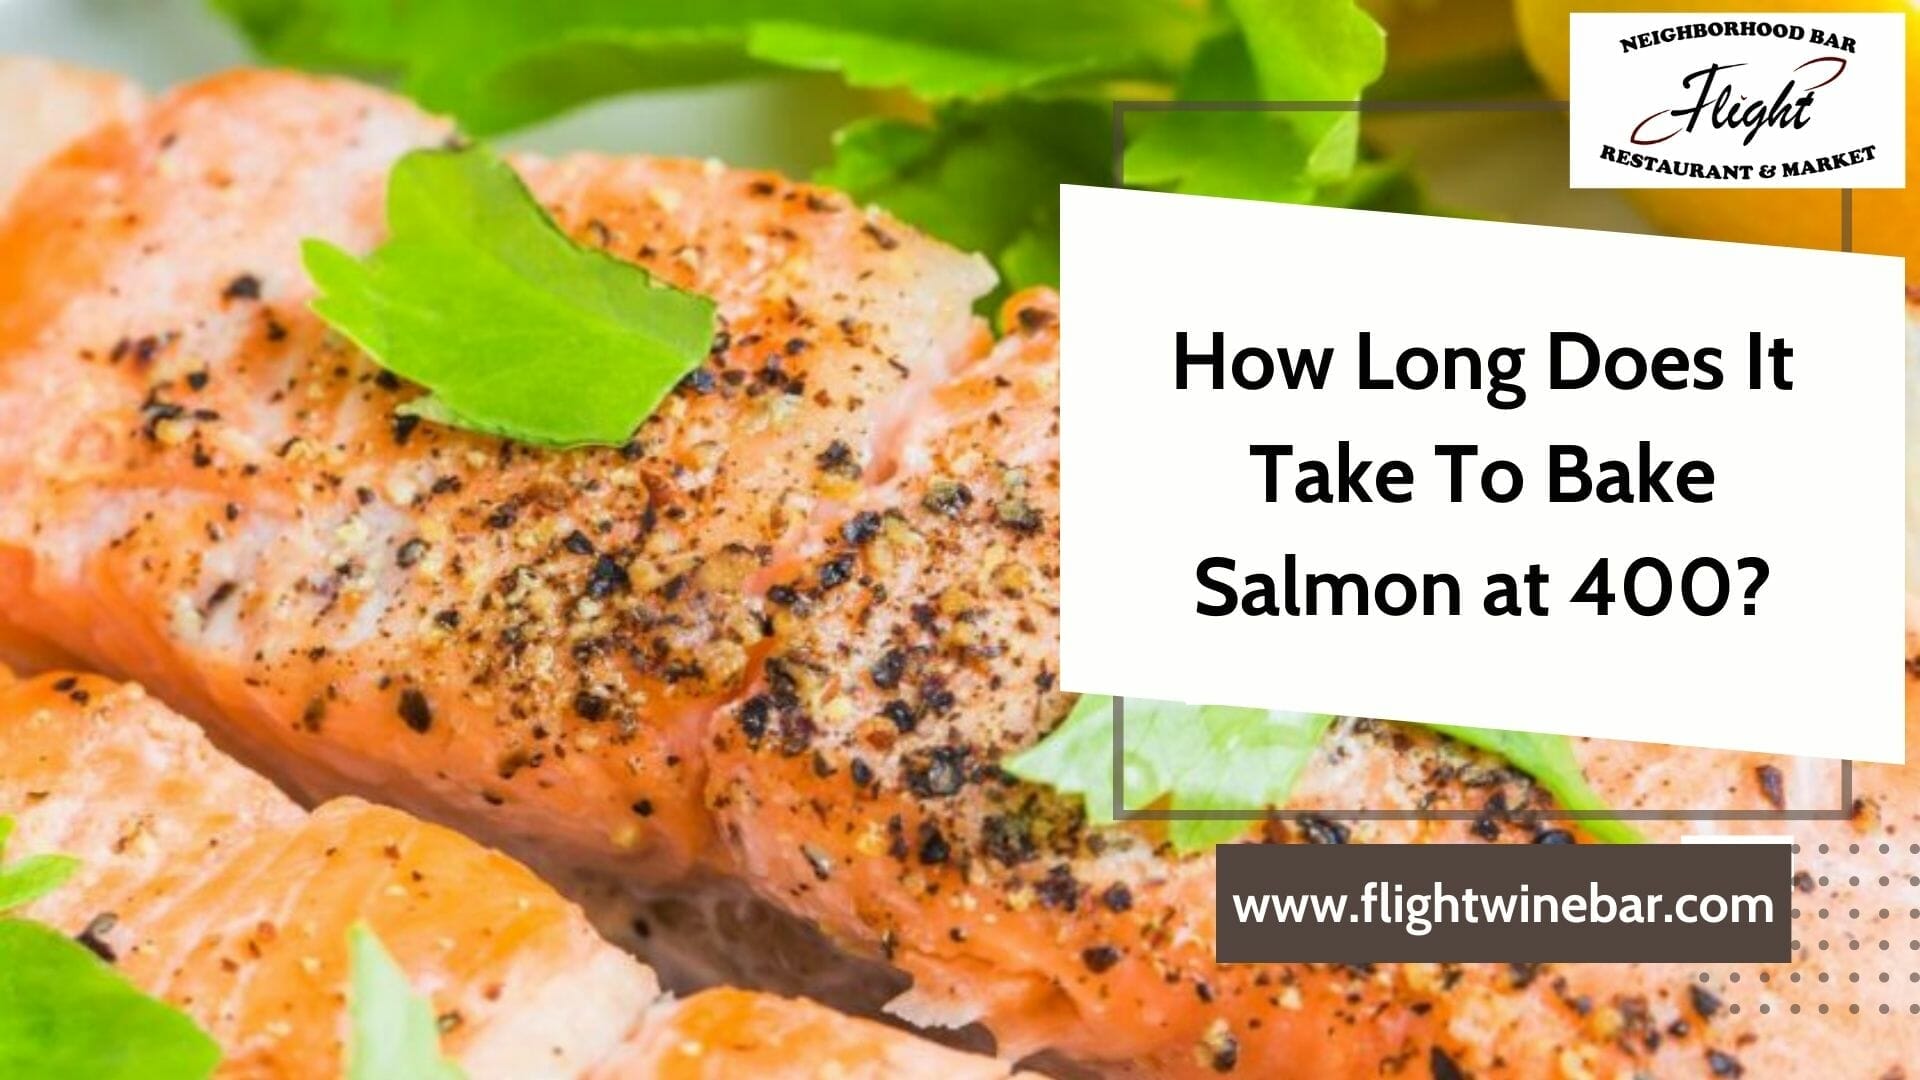 How Long Does It Take To Bake Salmon at 400